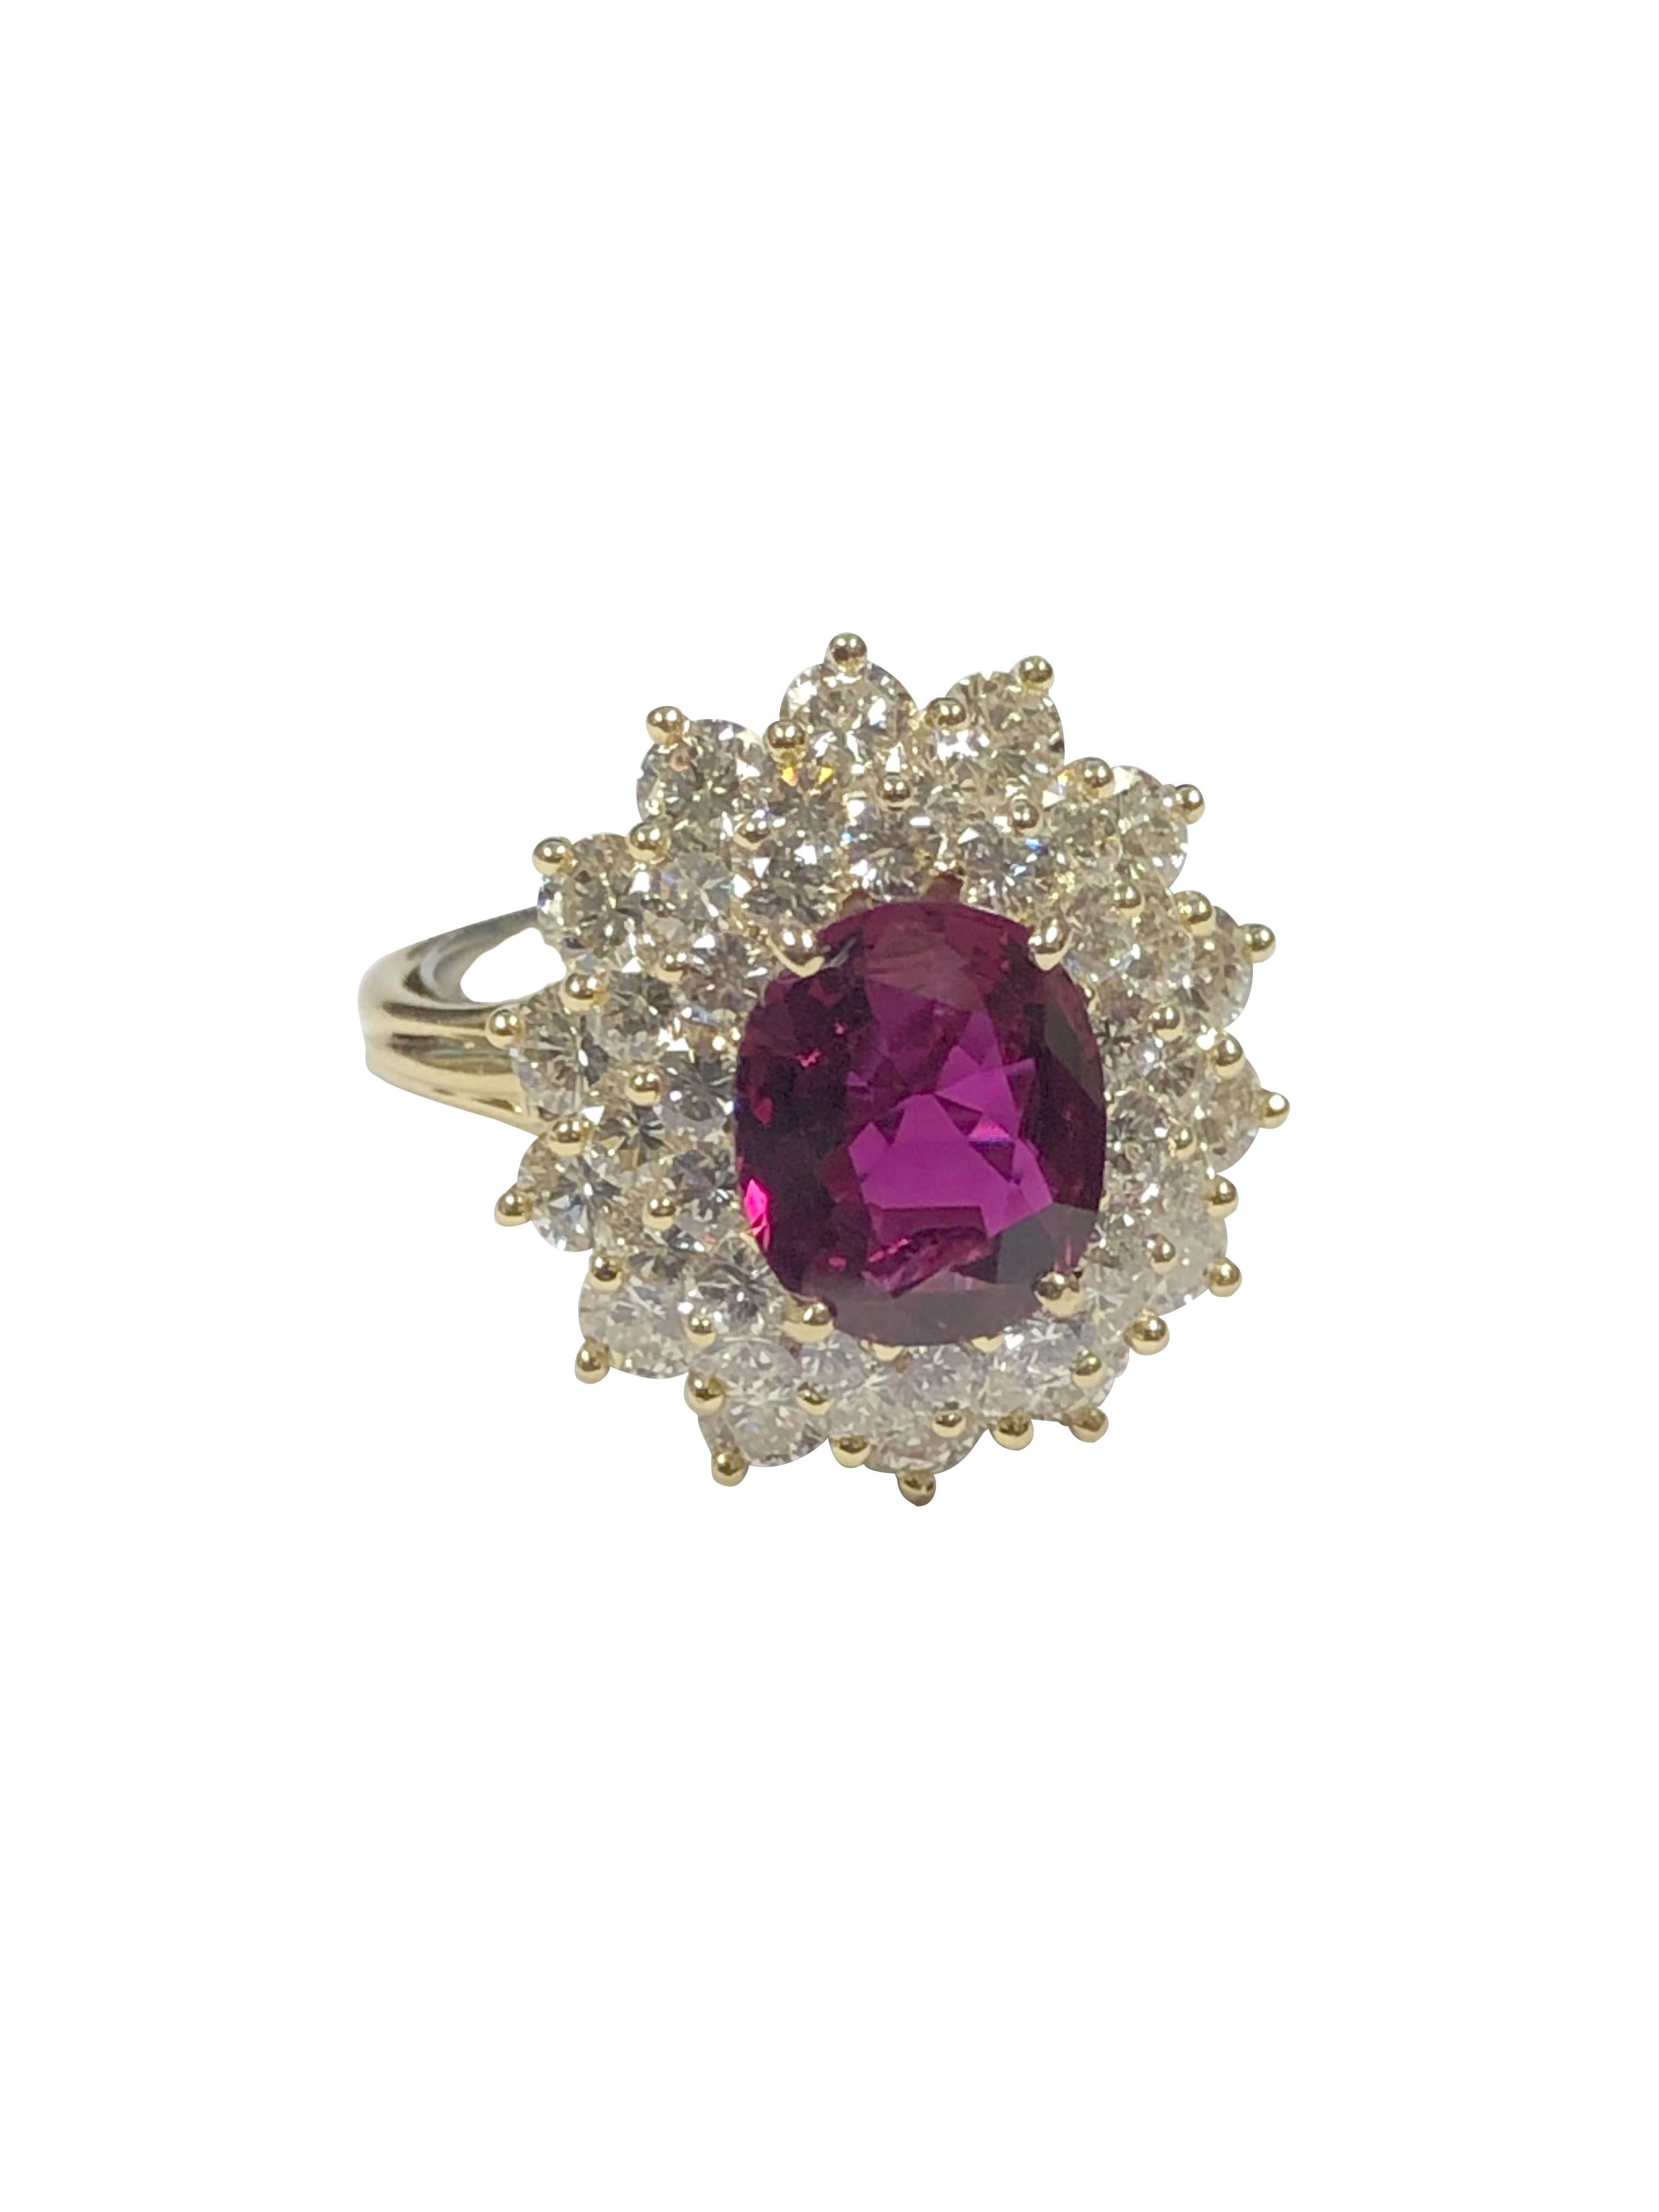 Circa 1980s Tiffany & Company 18k Yellow Gold Ring, centrally set with a 2.21 carat Oval Step Cut Ruby that is Thai is Thai in Origin, G.I A analysis shows that this stone is Heat treated, showing more of a pigeon Blood Red in color with light